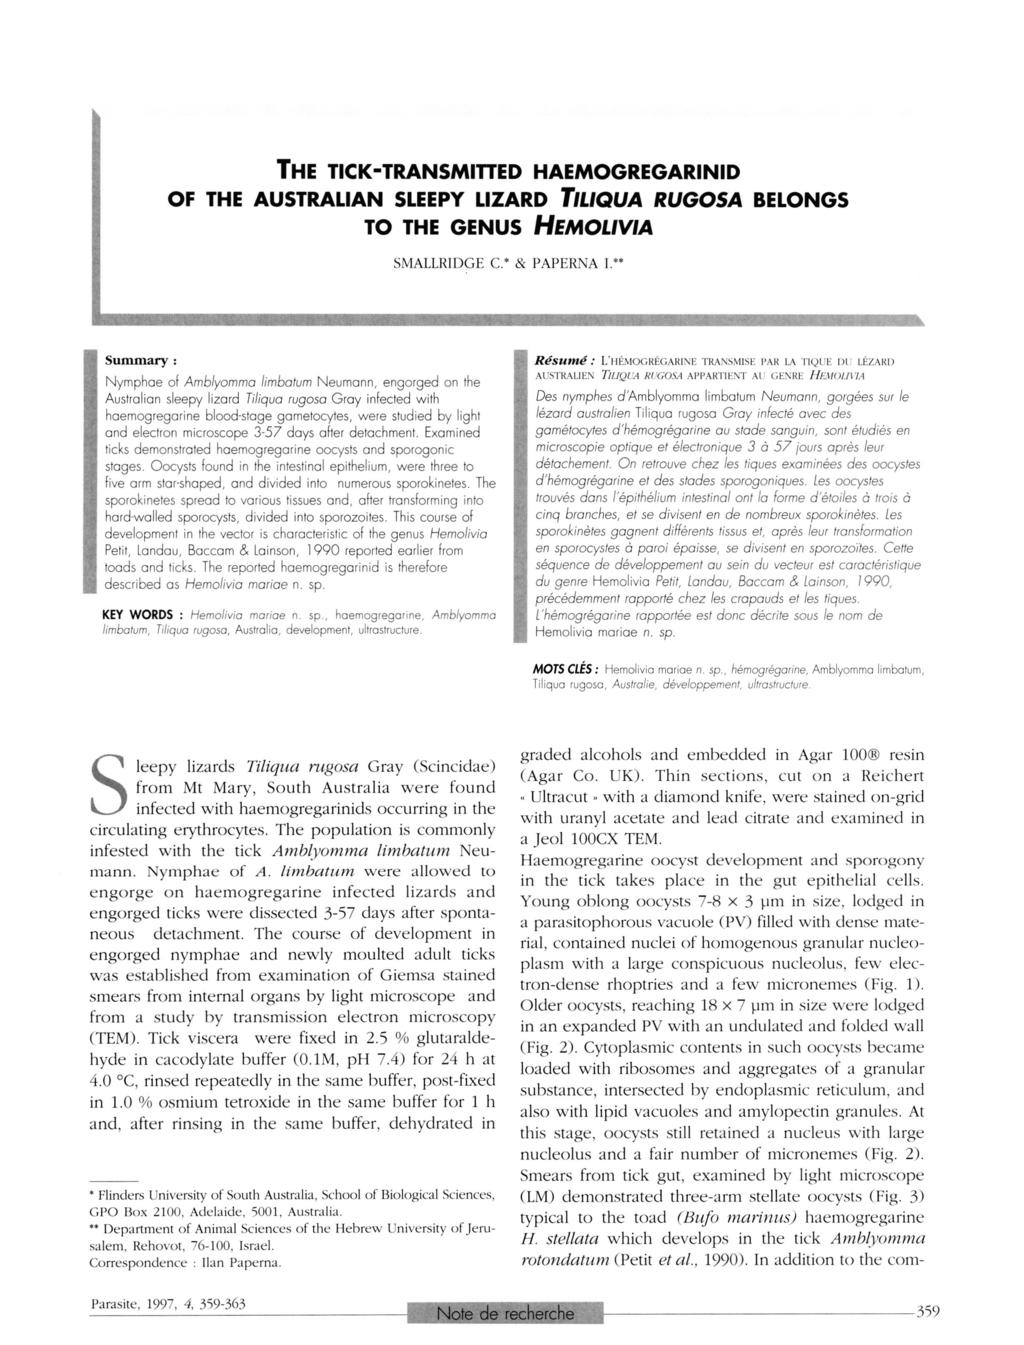 Article available at http://www.parasite-journal.org or http://dx.doi.org/10.